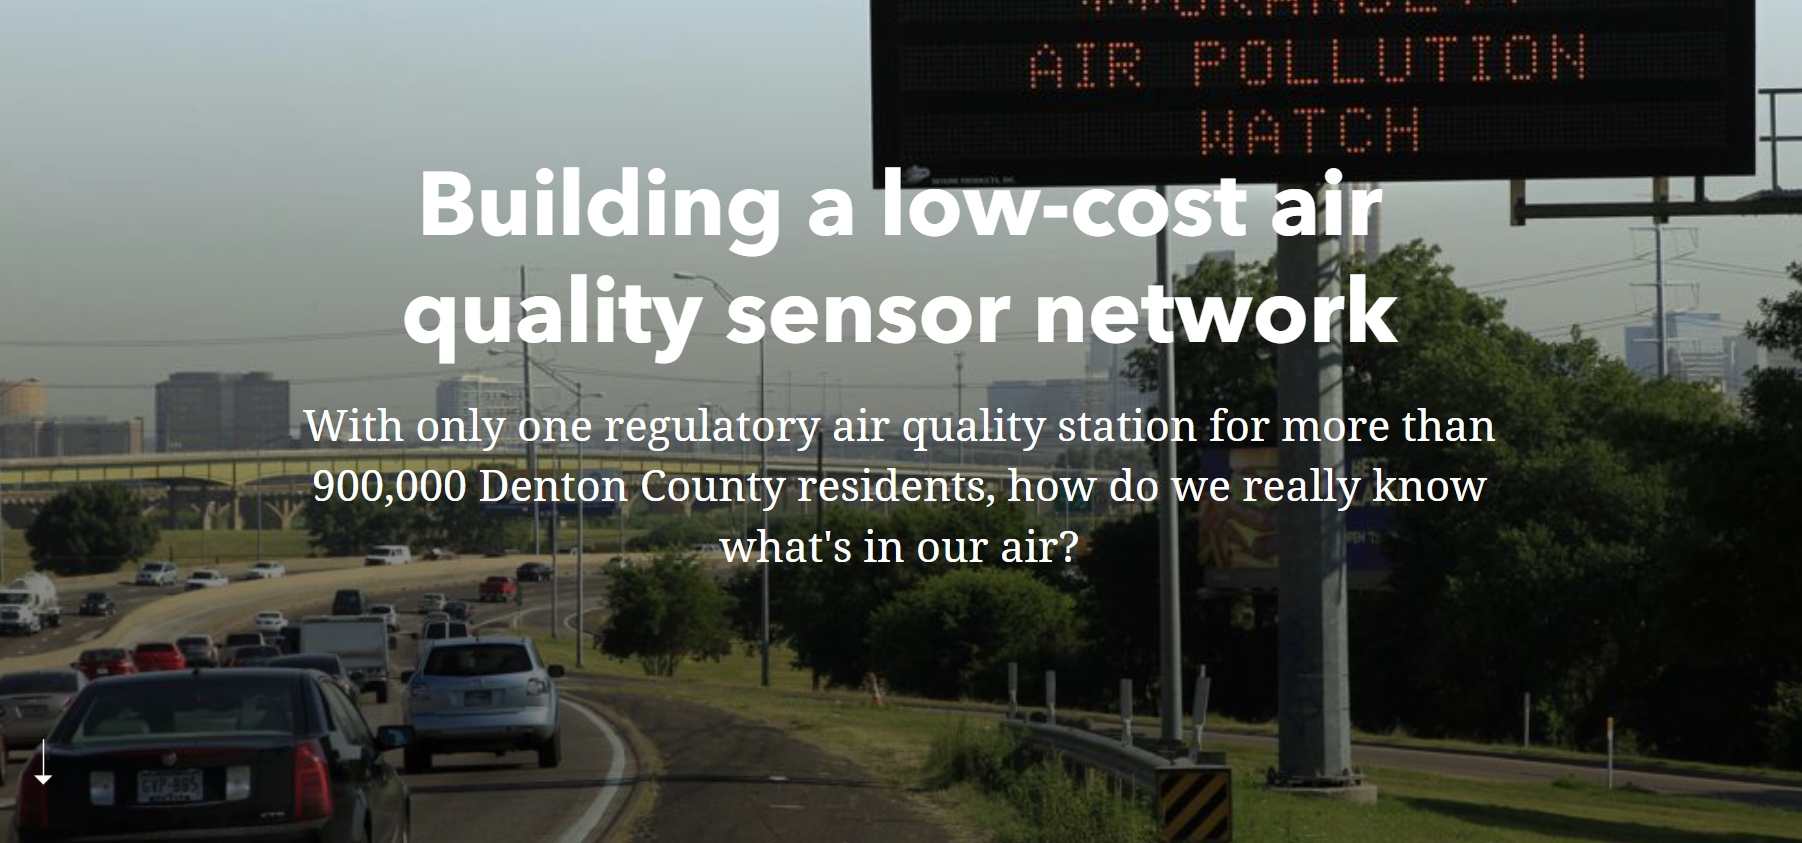 Building a low-cost air quality sensor network, Ronney A. Phillips